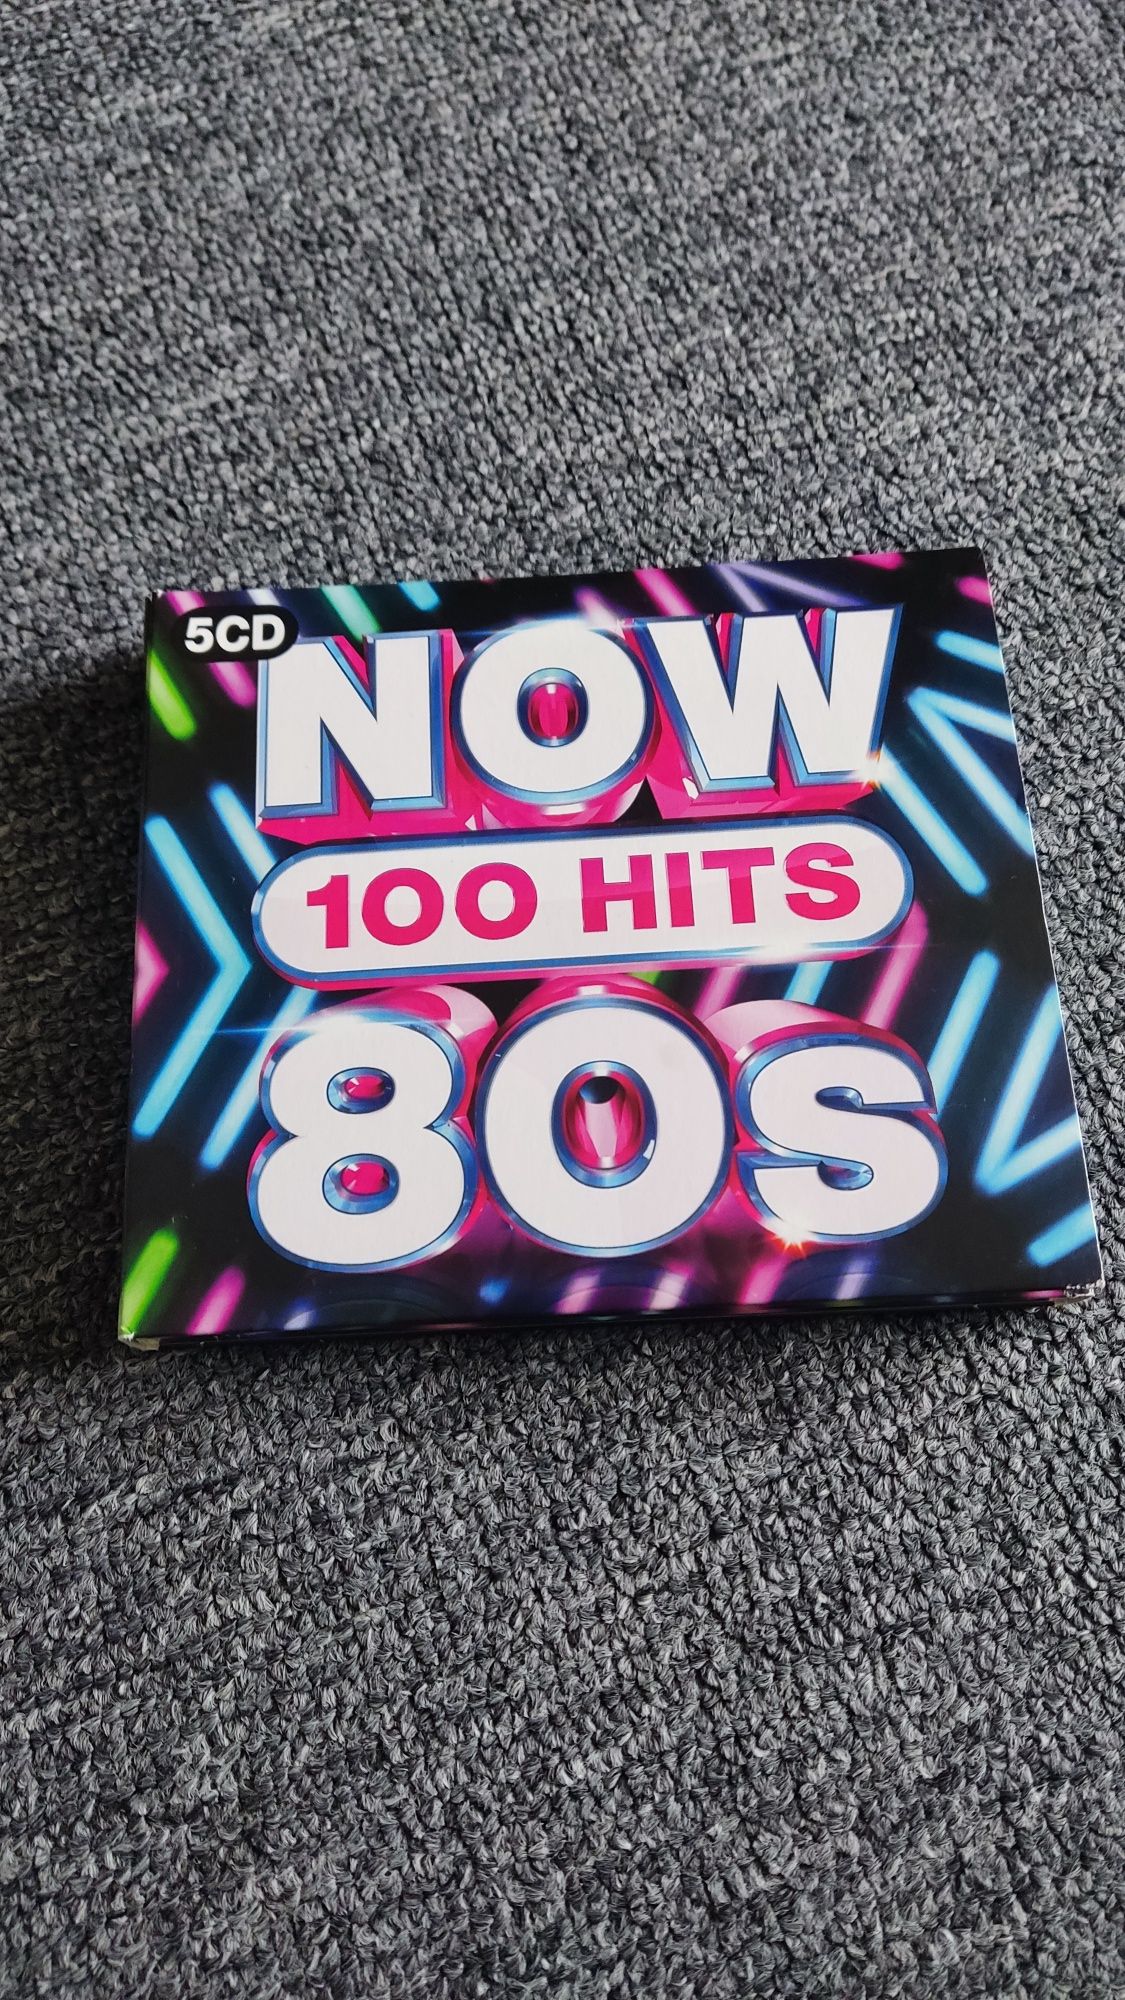 Now 100hits 80's